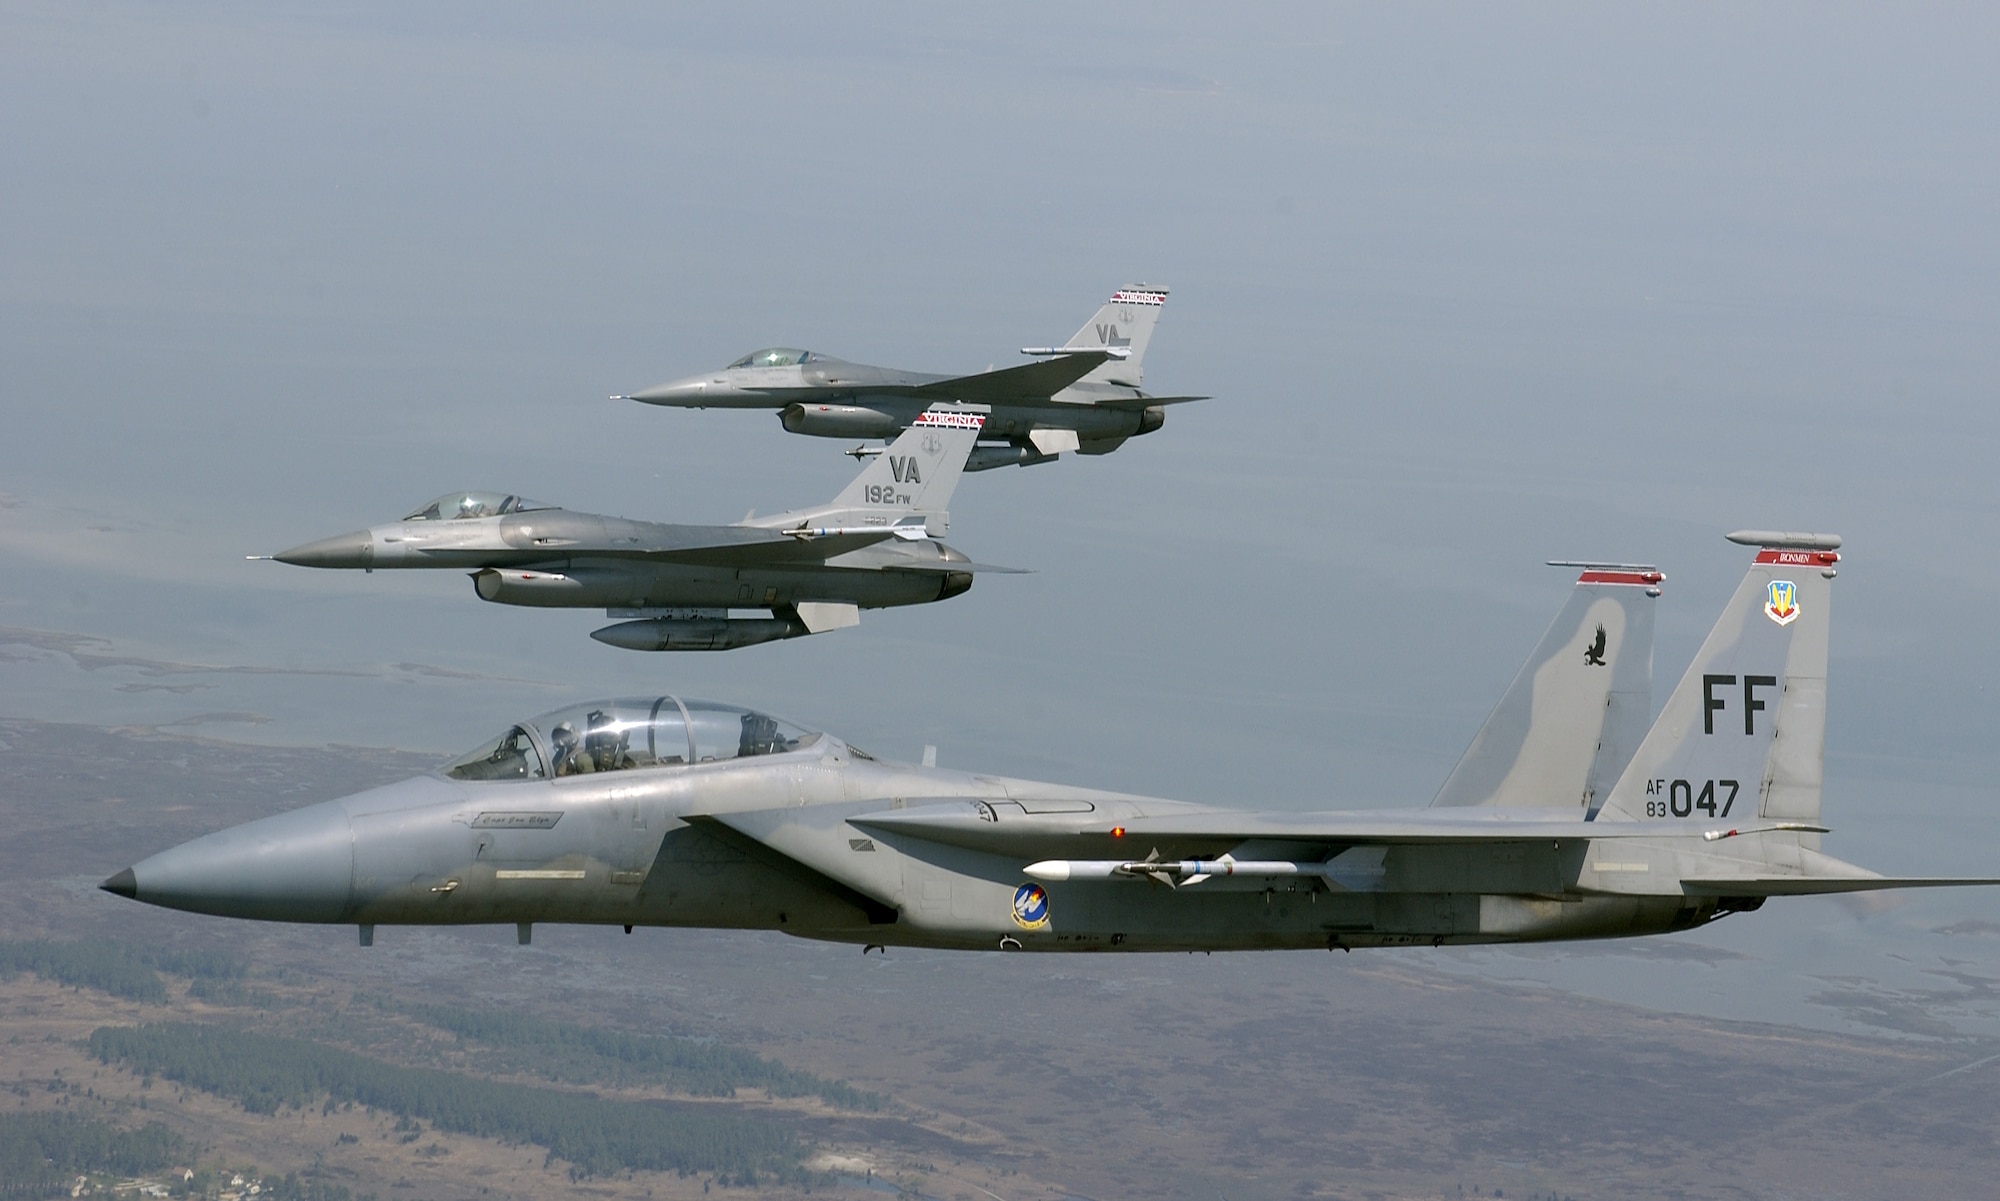 OVER VIRGINIA -- An F-15 Eagle is joined in formation by  F-16 Fighting Falcons during a training sortie here April 19. The F-15 is assigned to the 71st Fighter Squadron at Langley Air Force Base, Va., and the F-16s are assigned to the Virginia Air National Guard's 192nd Fighter Wing in Richmond.   (U.S. Air Force photo by Tech. Sgt. Ben Bloker)